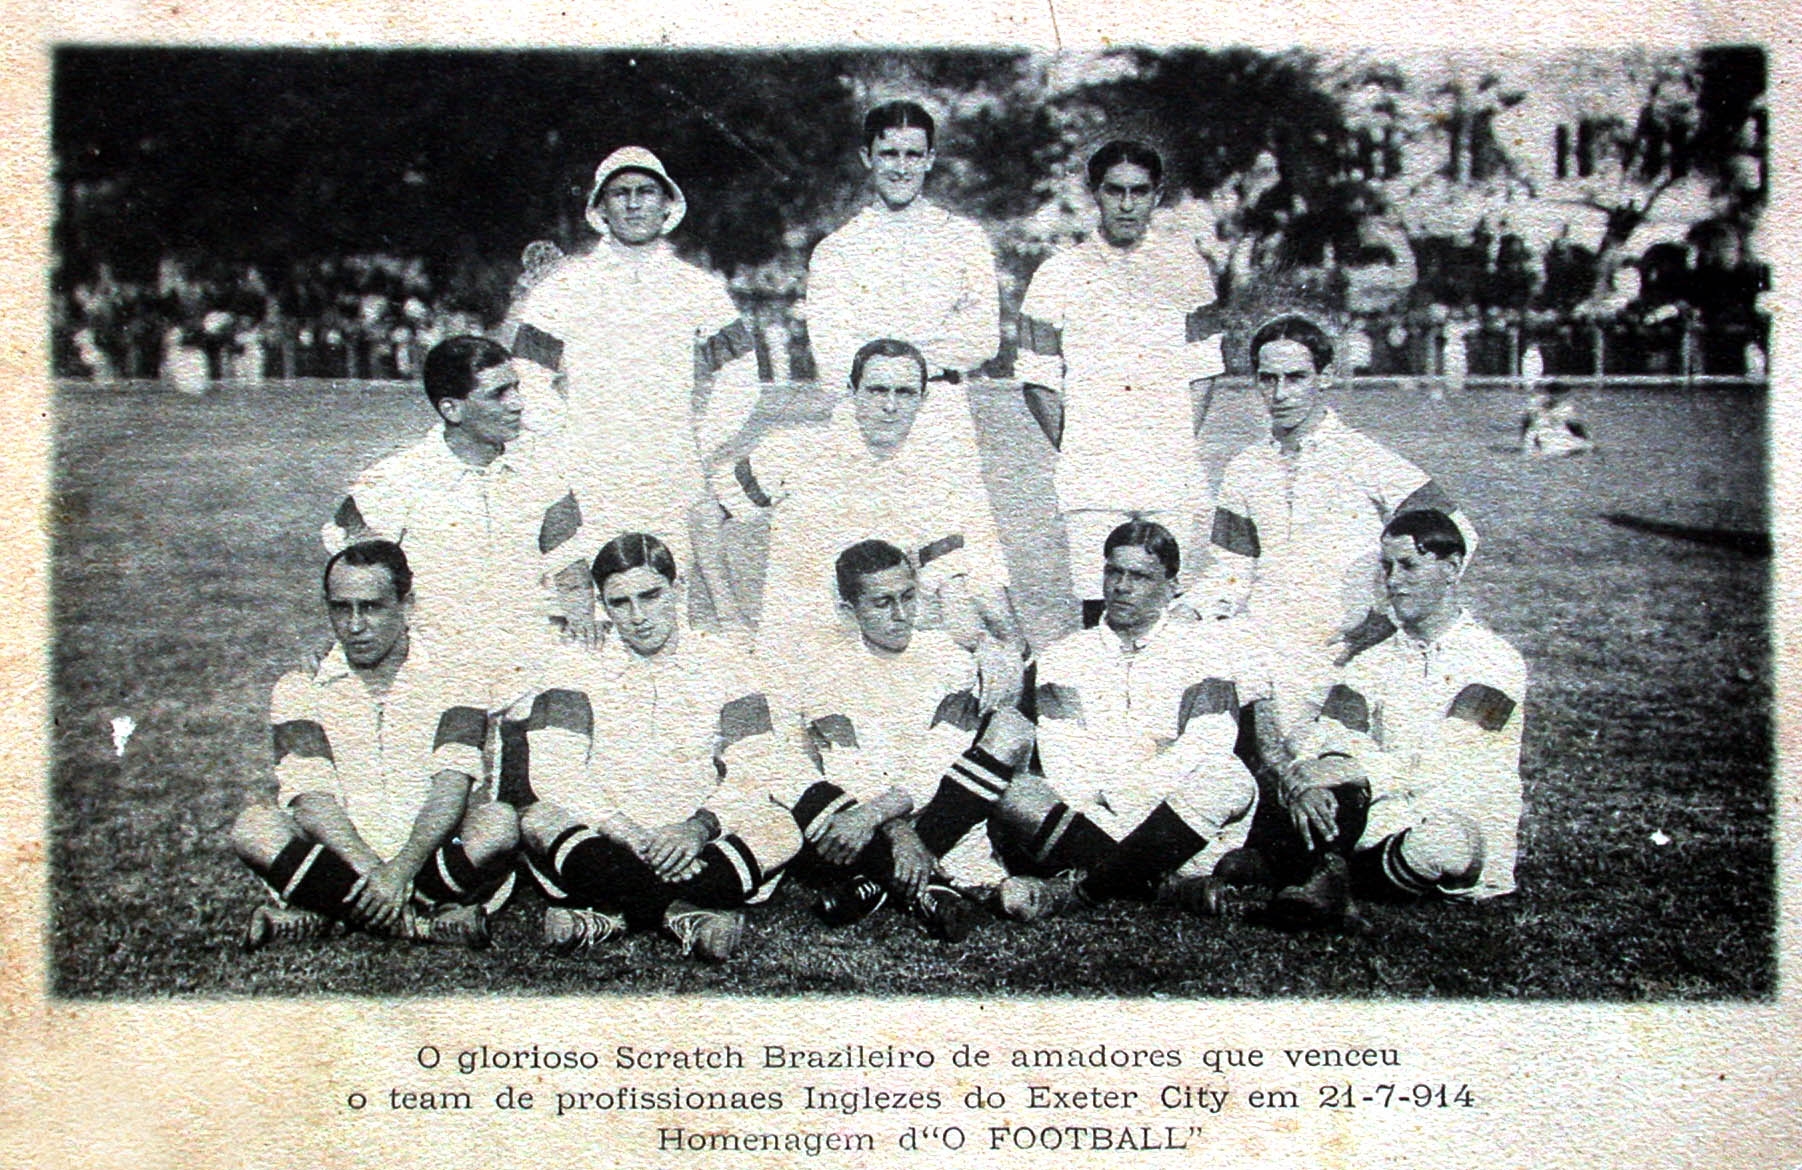 The Exeter City team that played Brazil in 1914